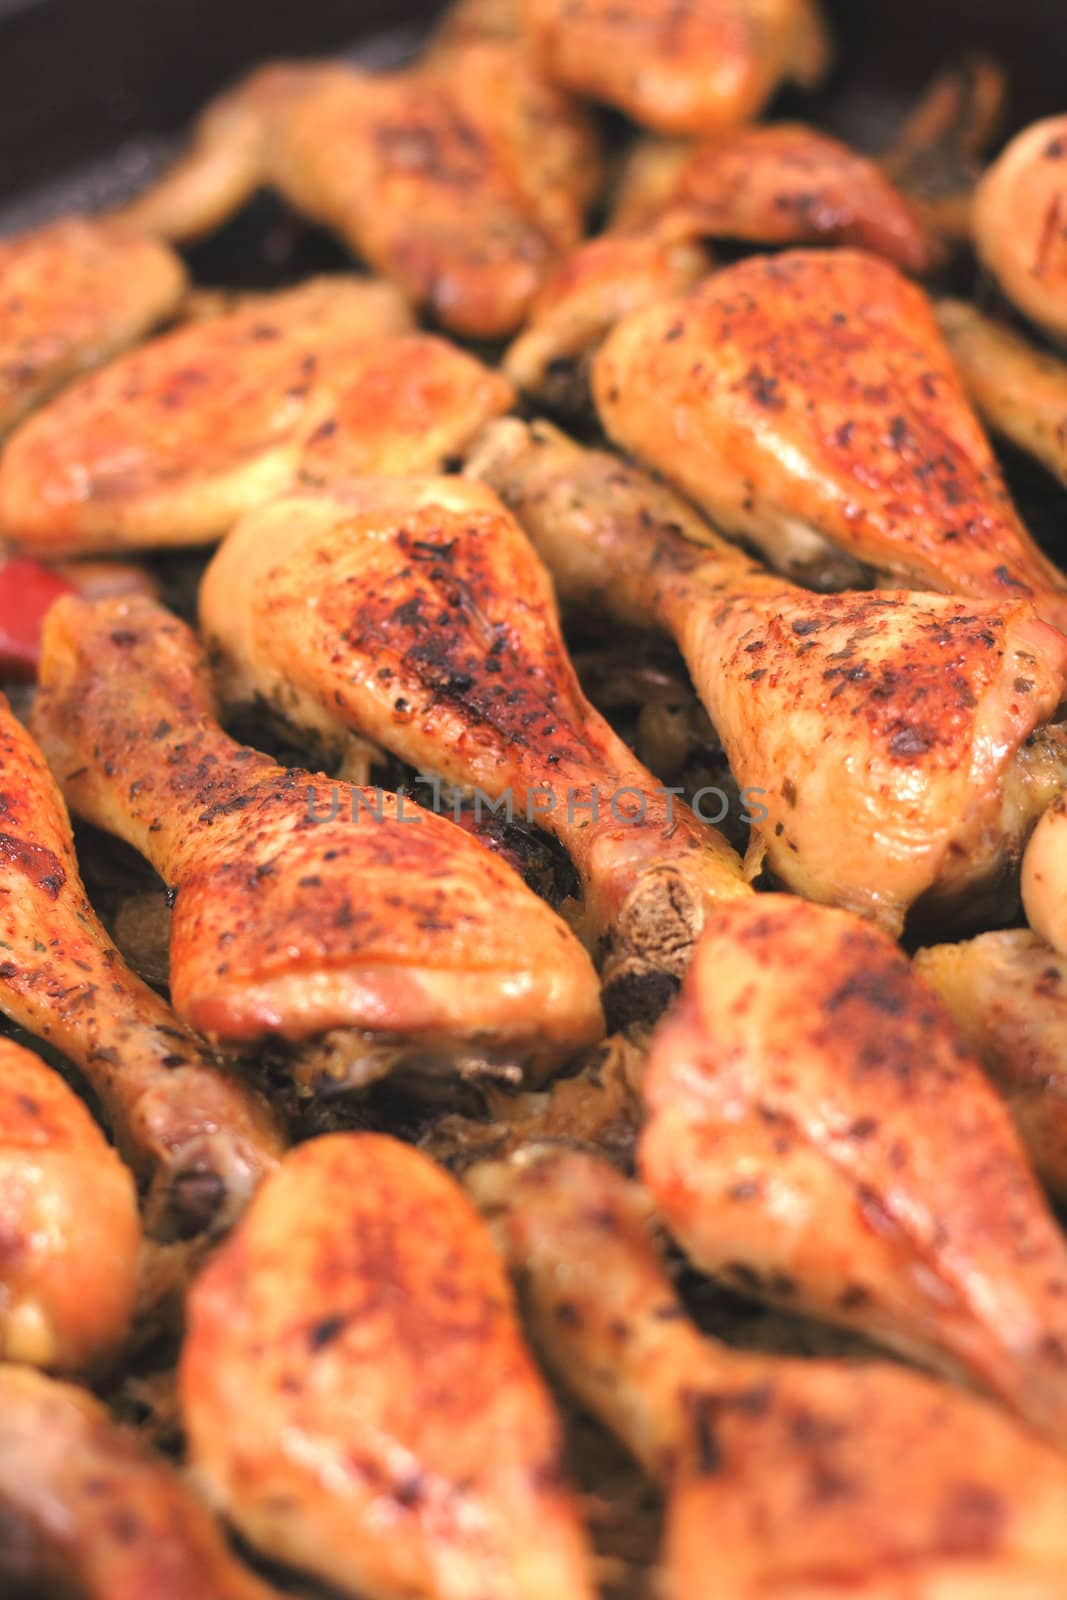 grilled chicken legs as very nice food backgound